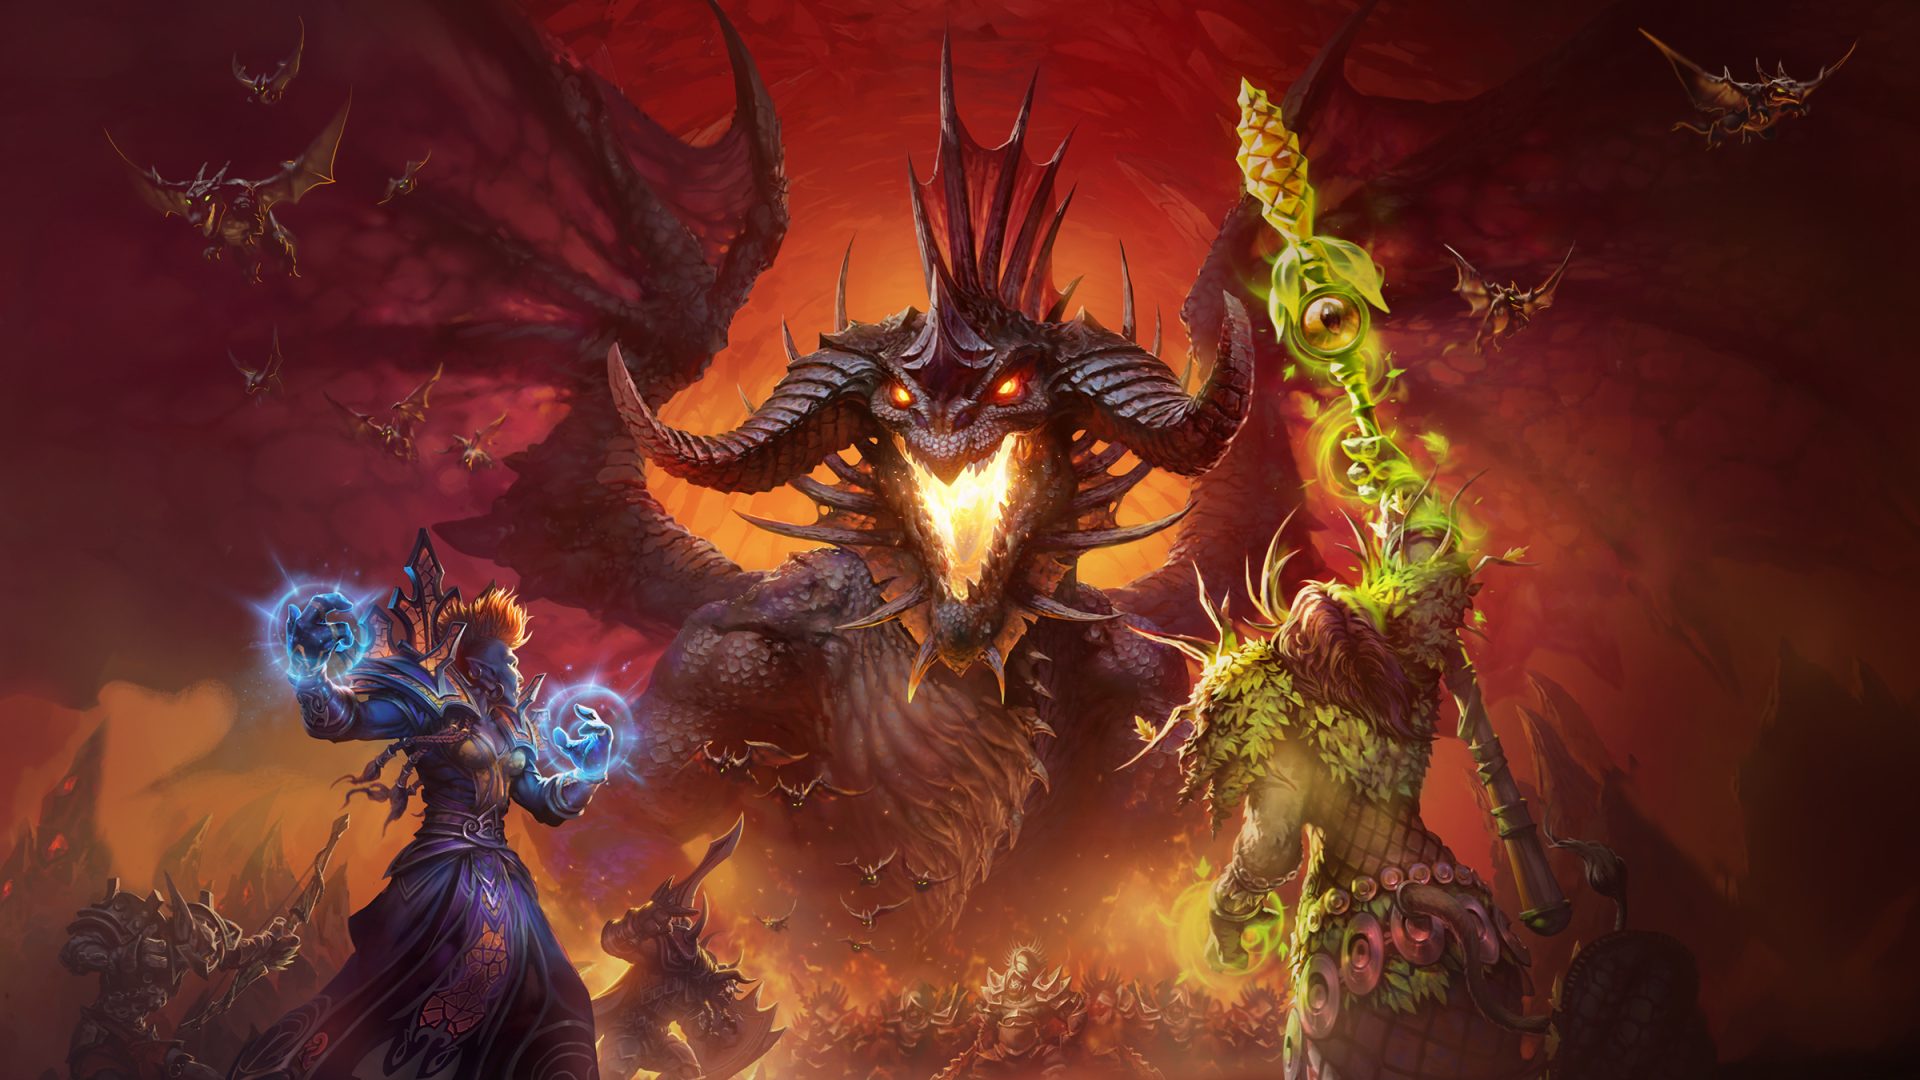 How Long Will World of Warcraft Last?